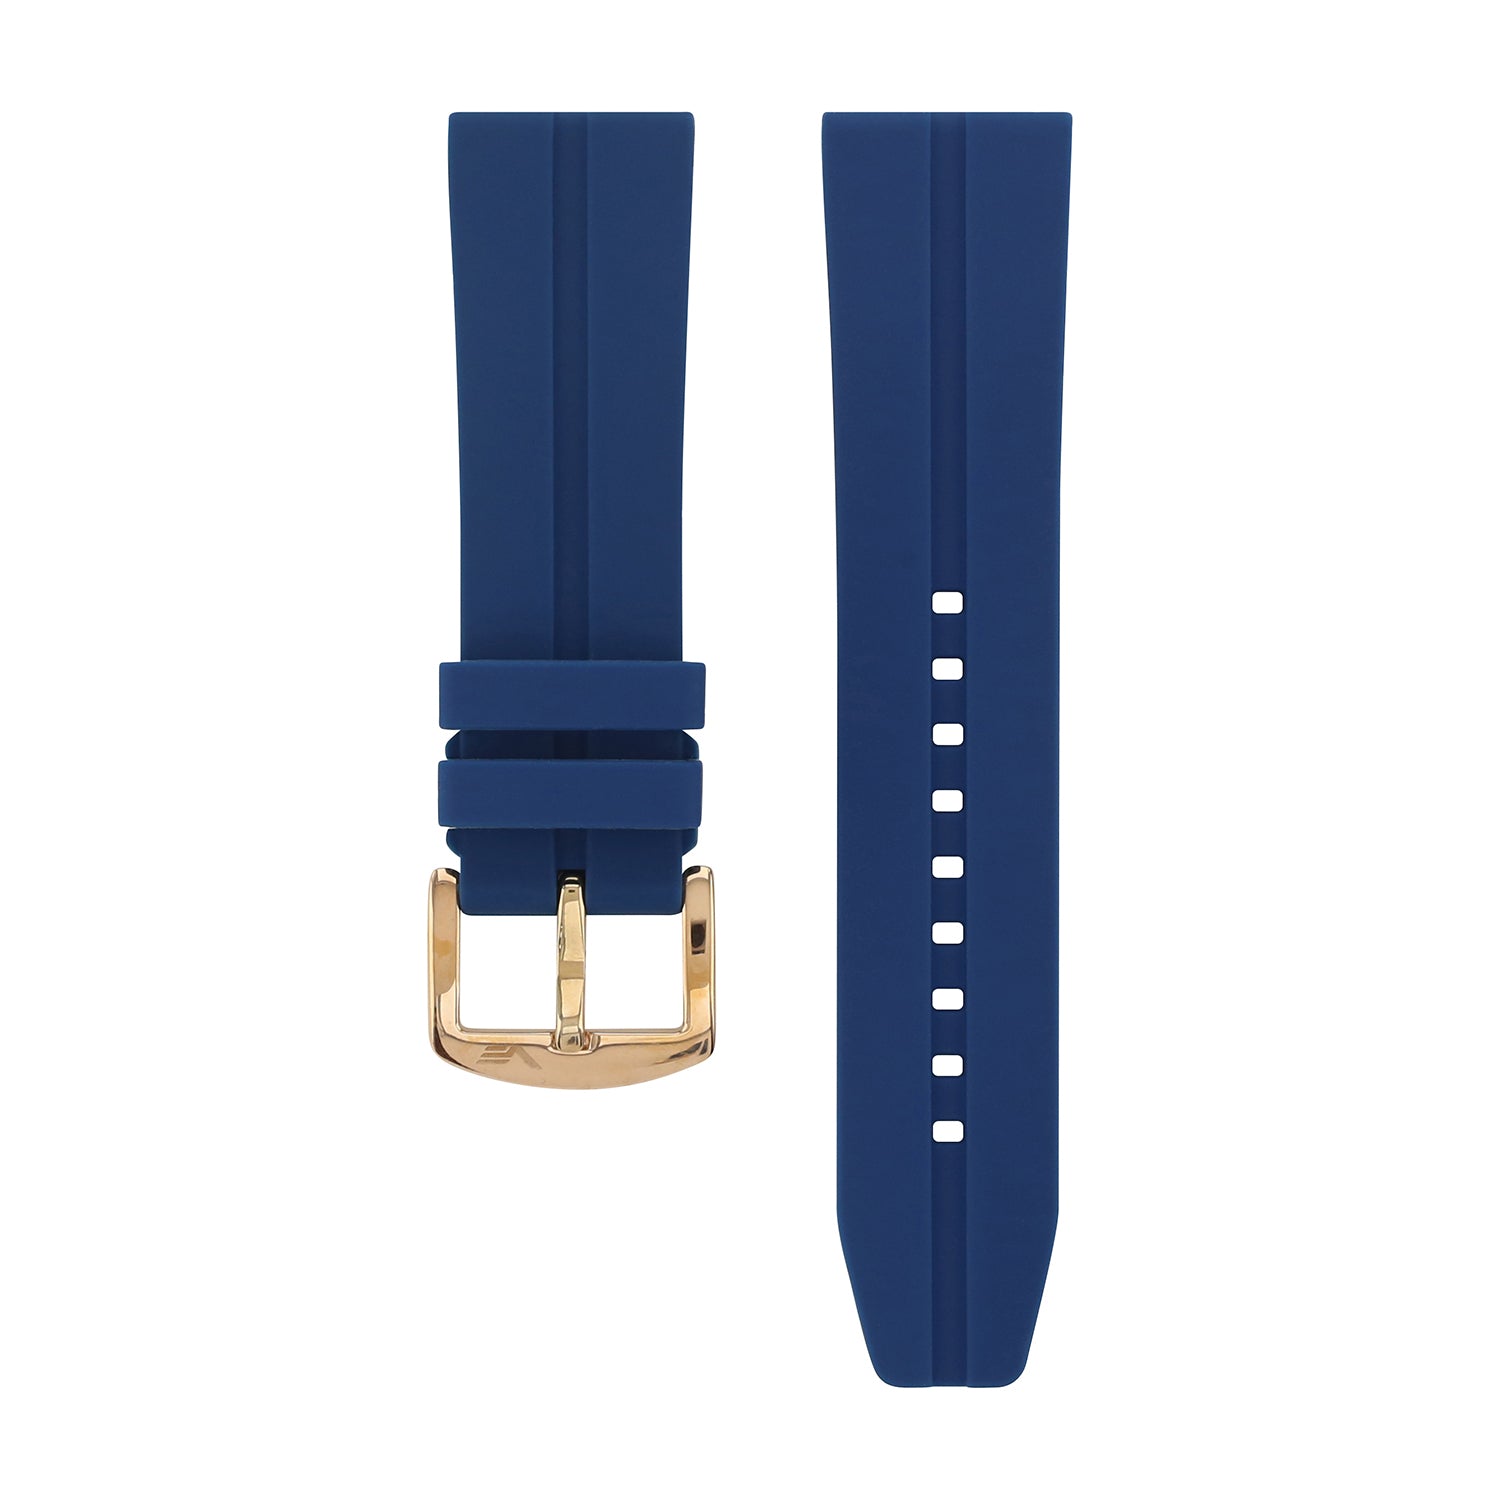 EXPEDITION BLUE SILICONE STRAP 24mm - ROSE GOLD BUCKLE